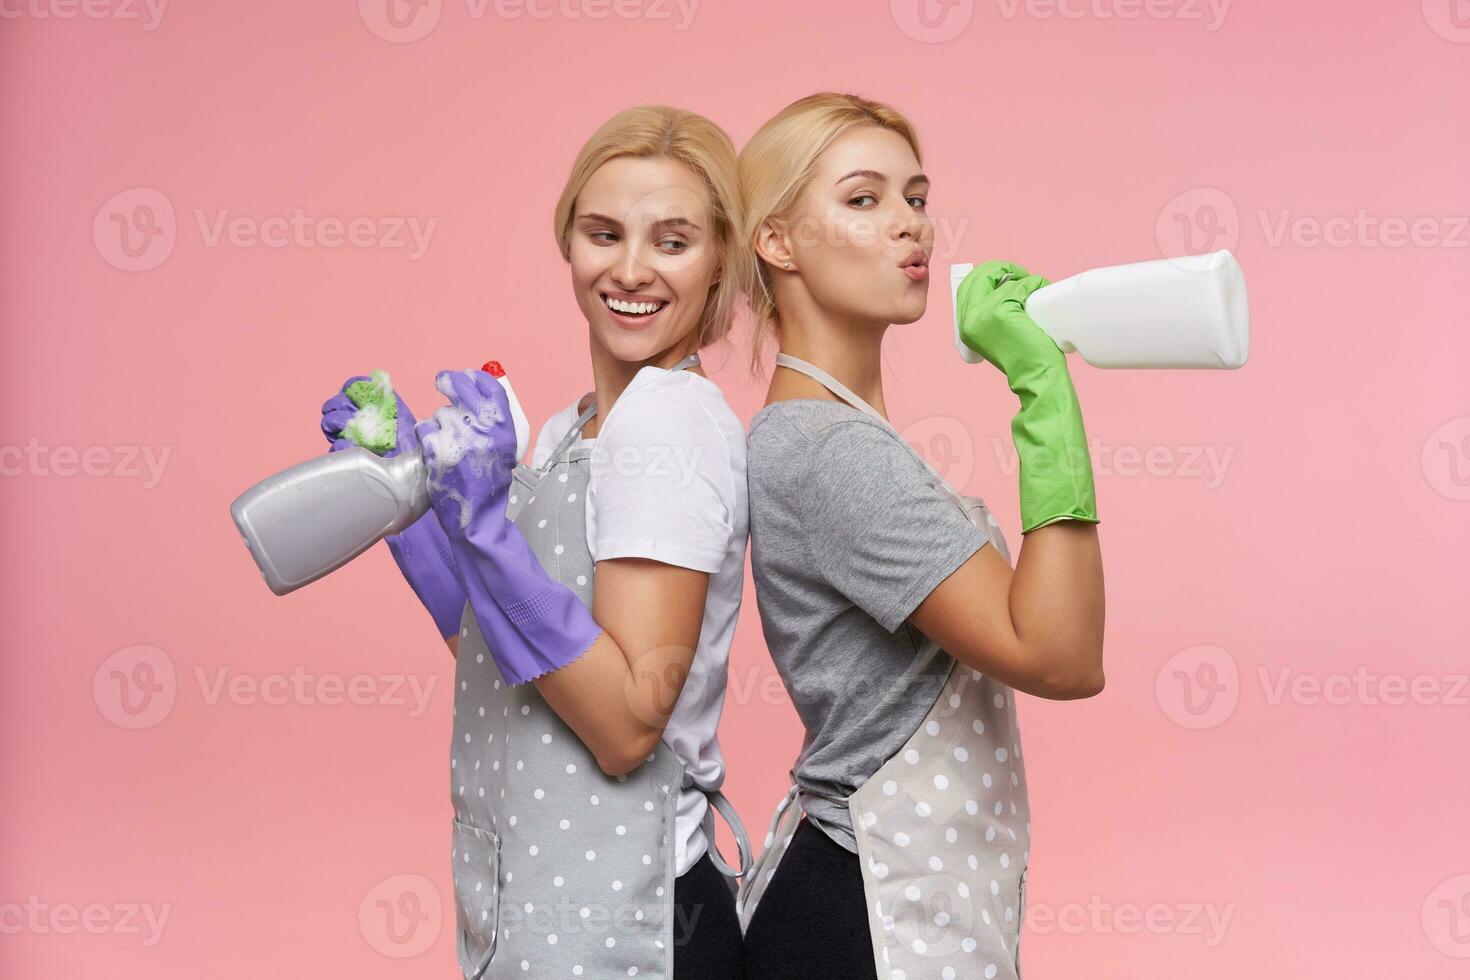 Indoor photo of young blonde females holding spray bottles while leaning on each other, wearing casual t-shirts and polka dot apron while posing over pink background